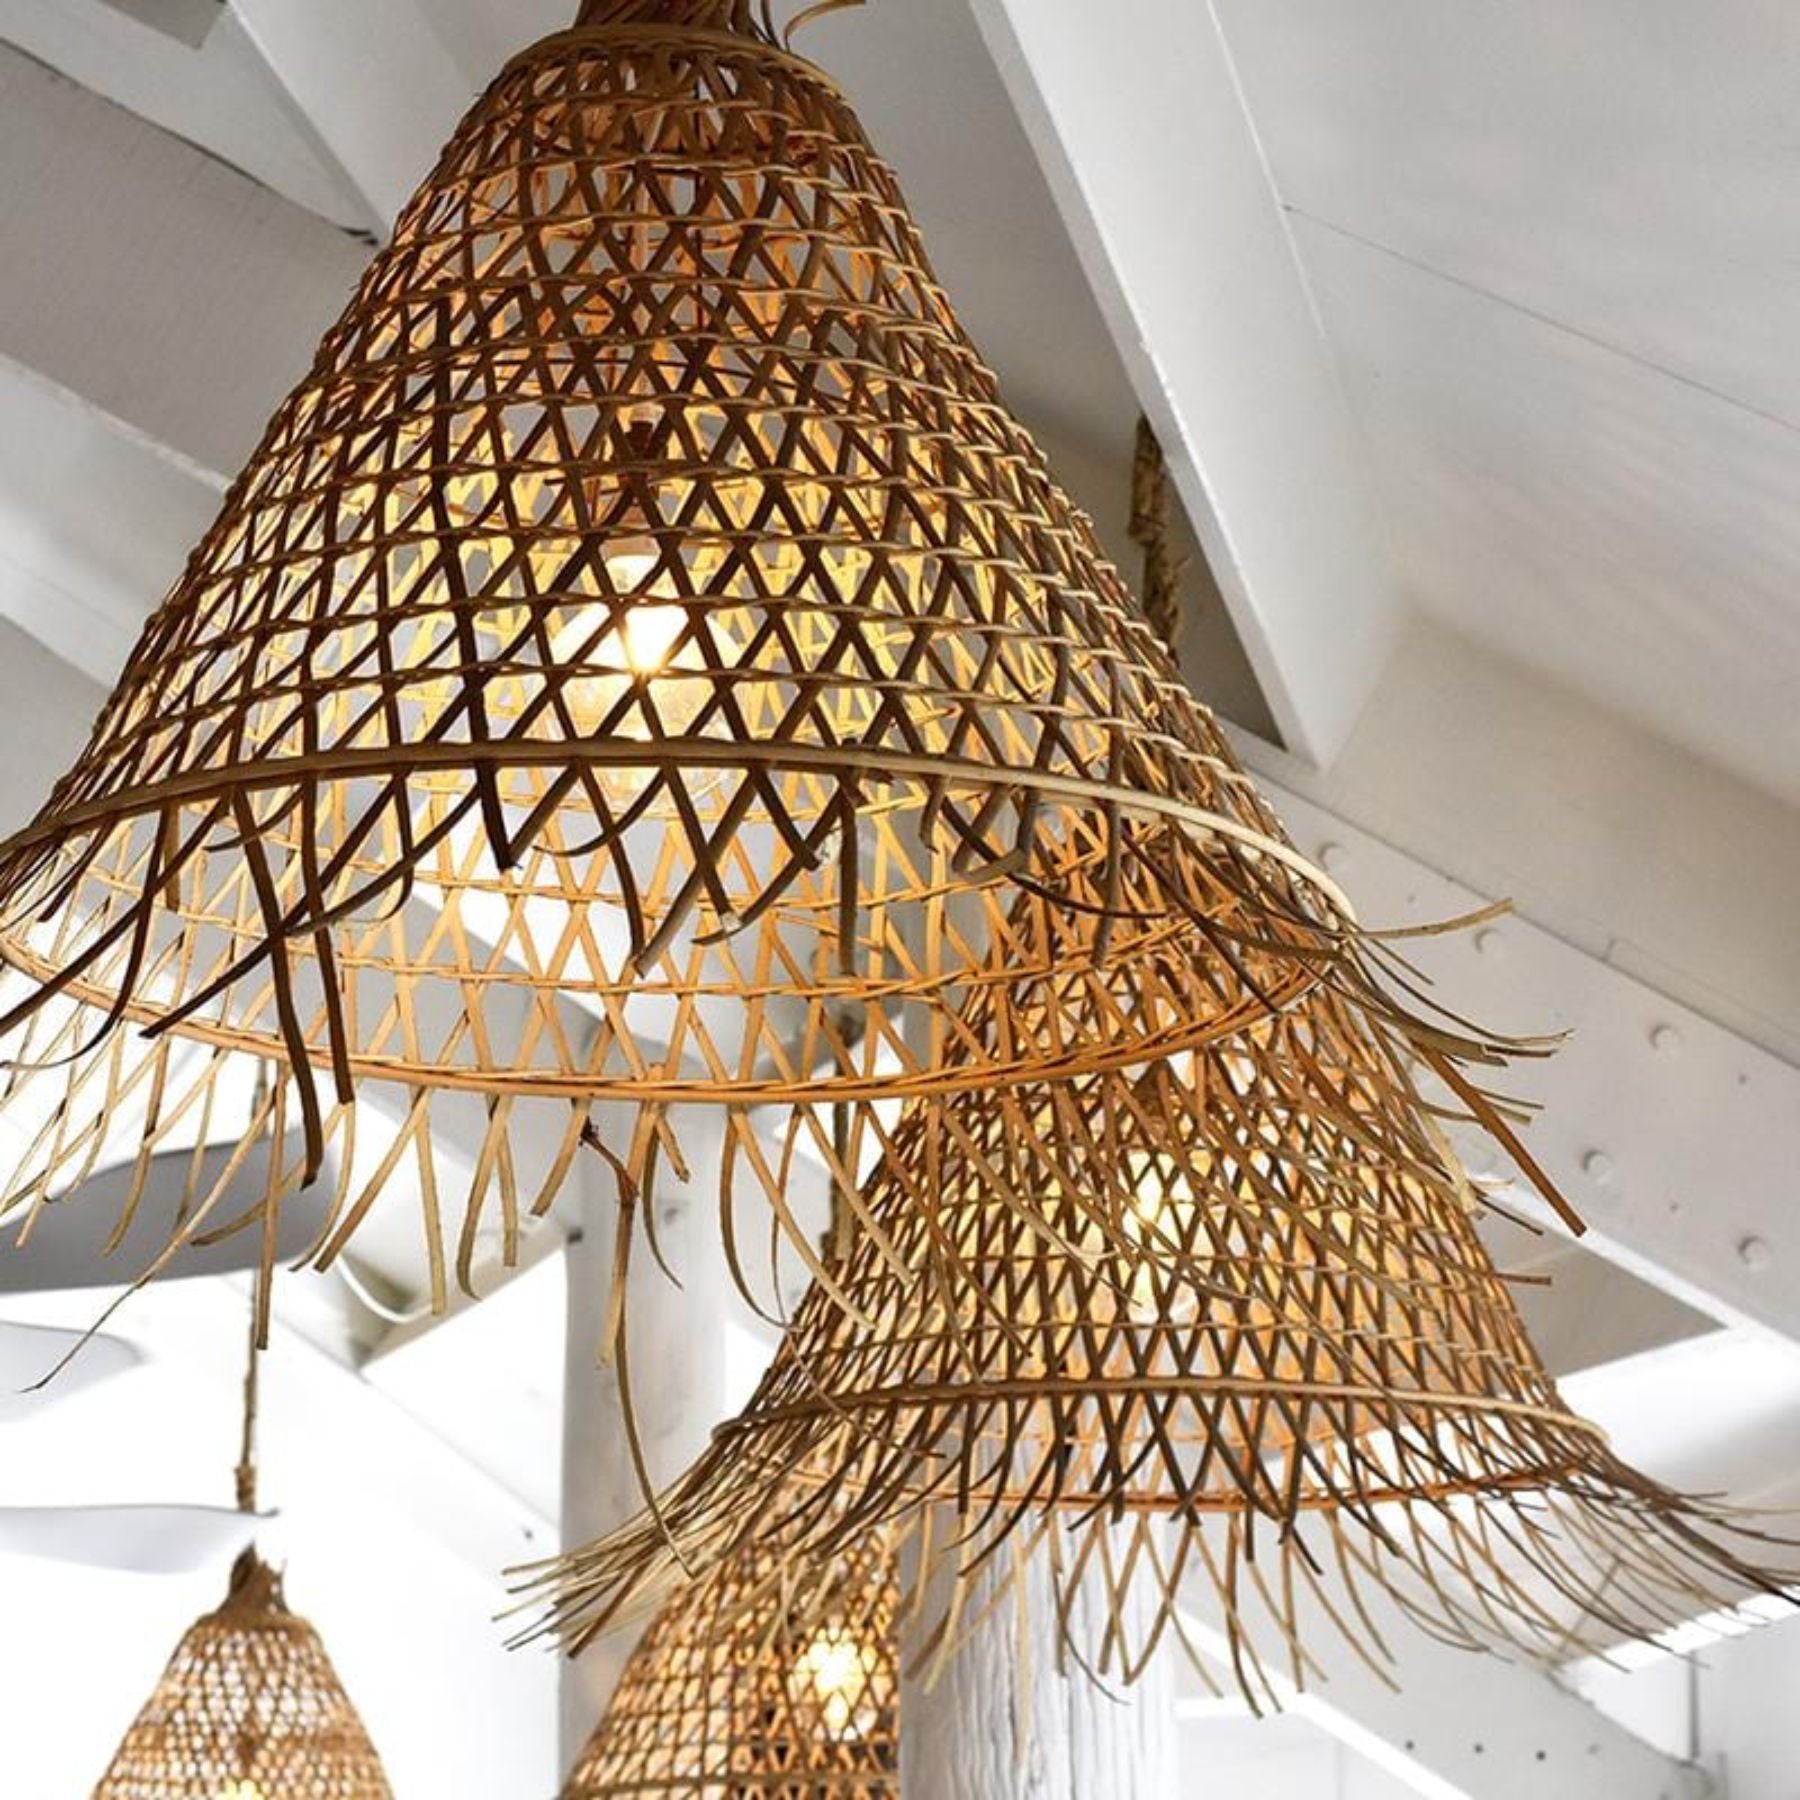 rattan hanging lights are increasingly popular because of their sustainable design